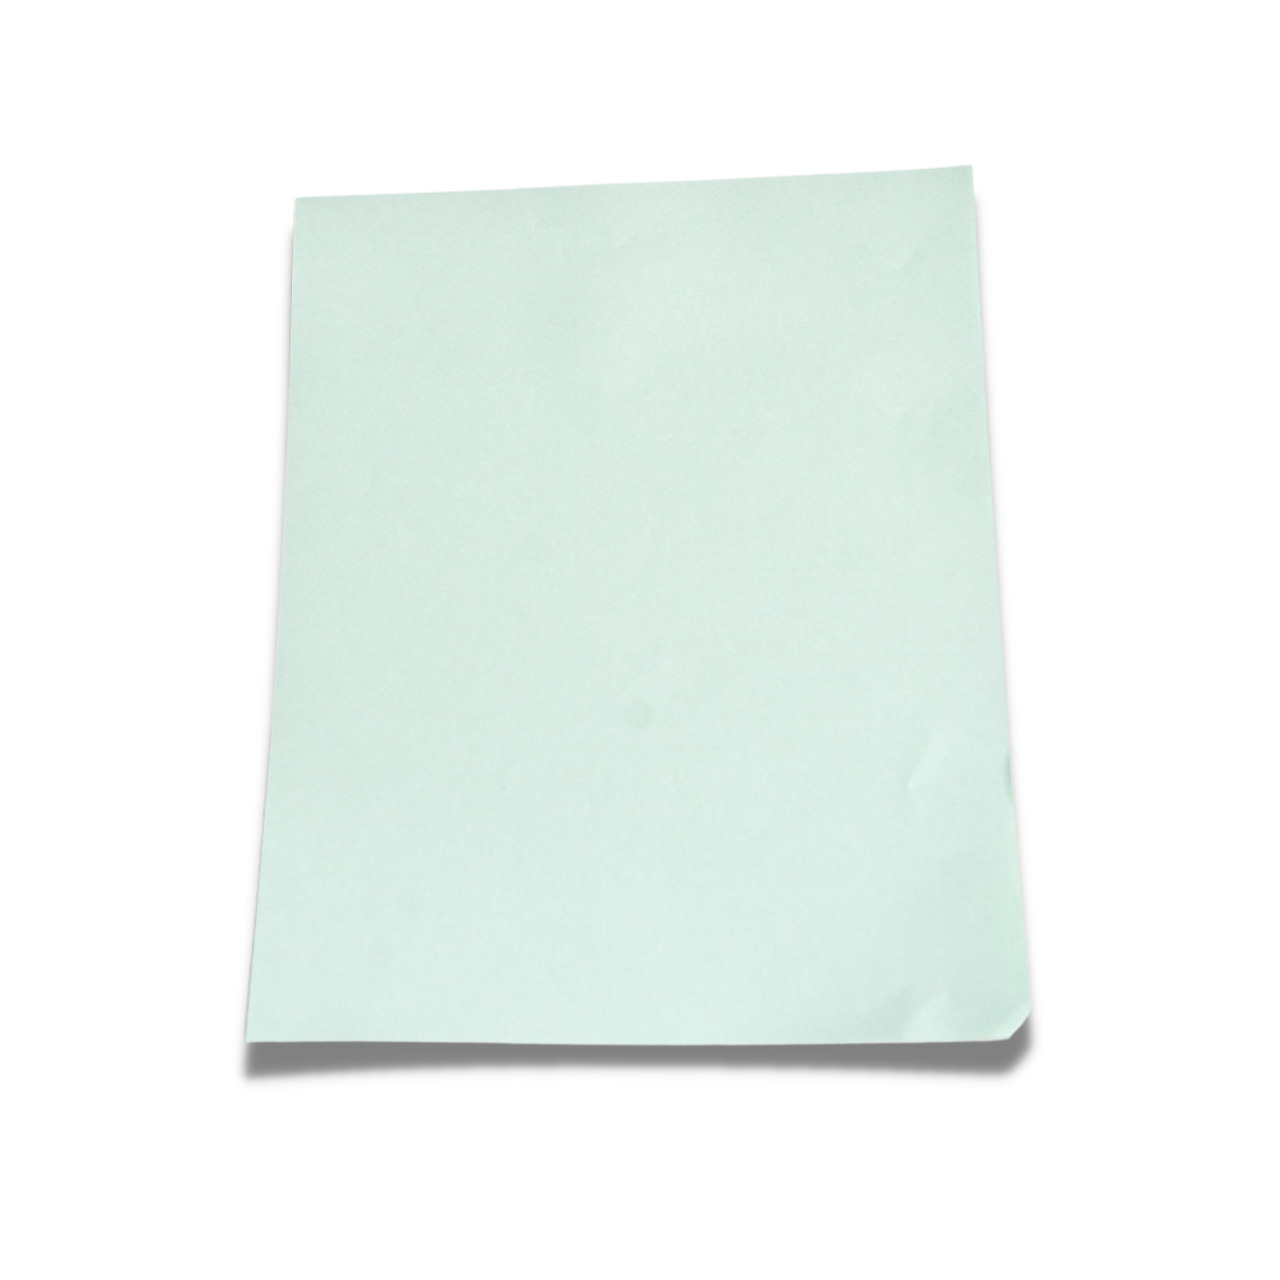 Cleanroom Paper; 3 Hole Punched, 8.5x11, Green, Autoclavable, 22.5#, 250  Sheets/Pack - 10 Packs/Case, LT-7177GN-8A-03